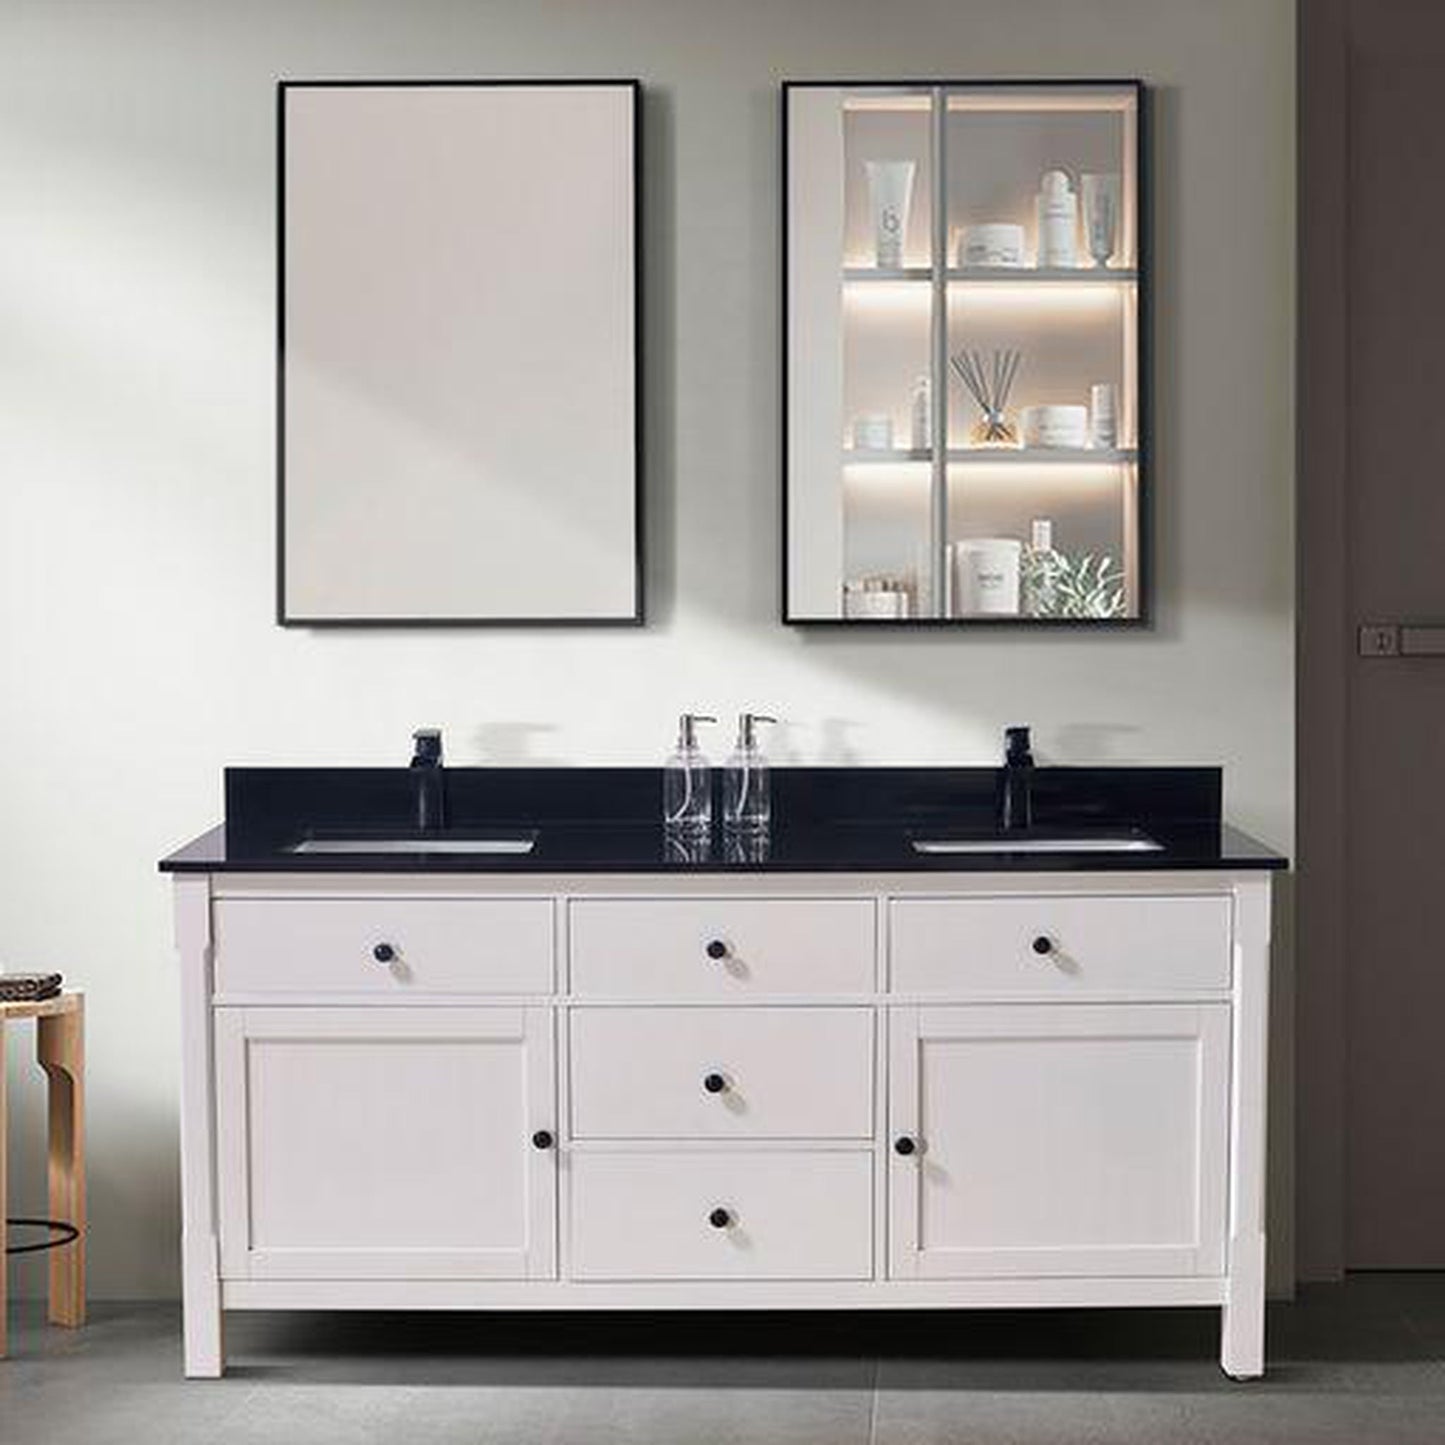 Altair Feltre 73" x 22" Imperial Black Composite Stone Bathroom Vanity Top With White SInk